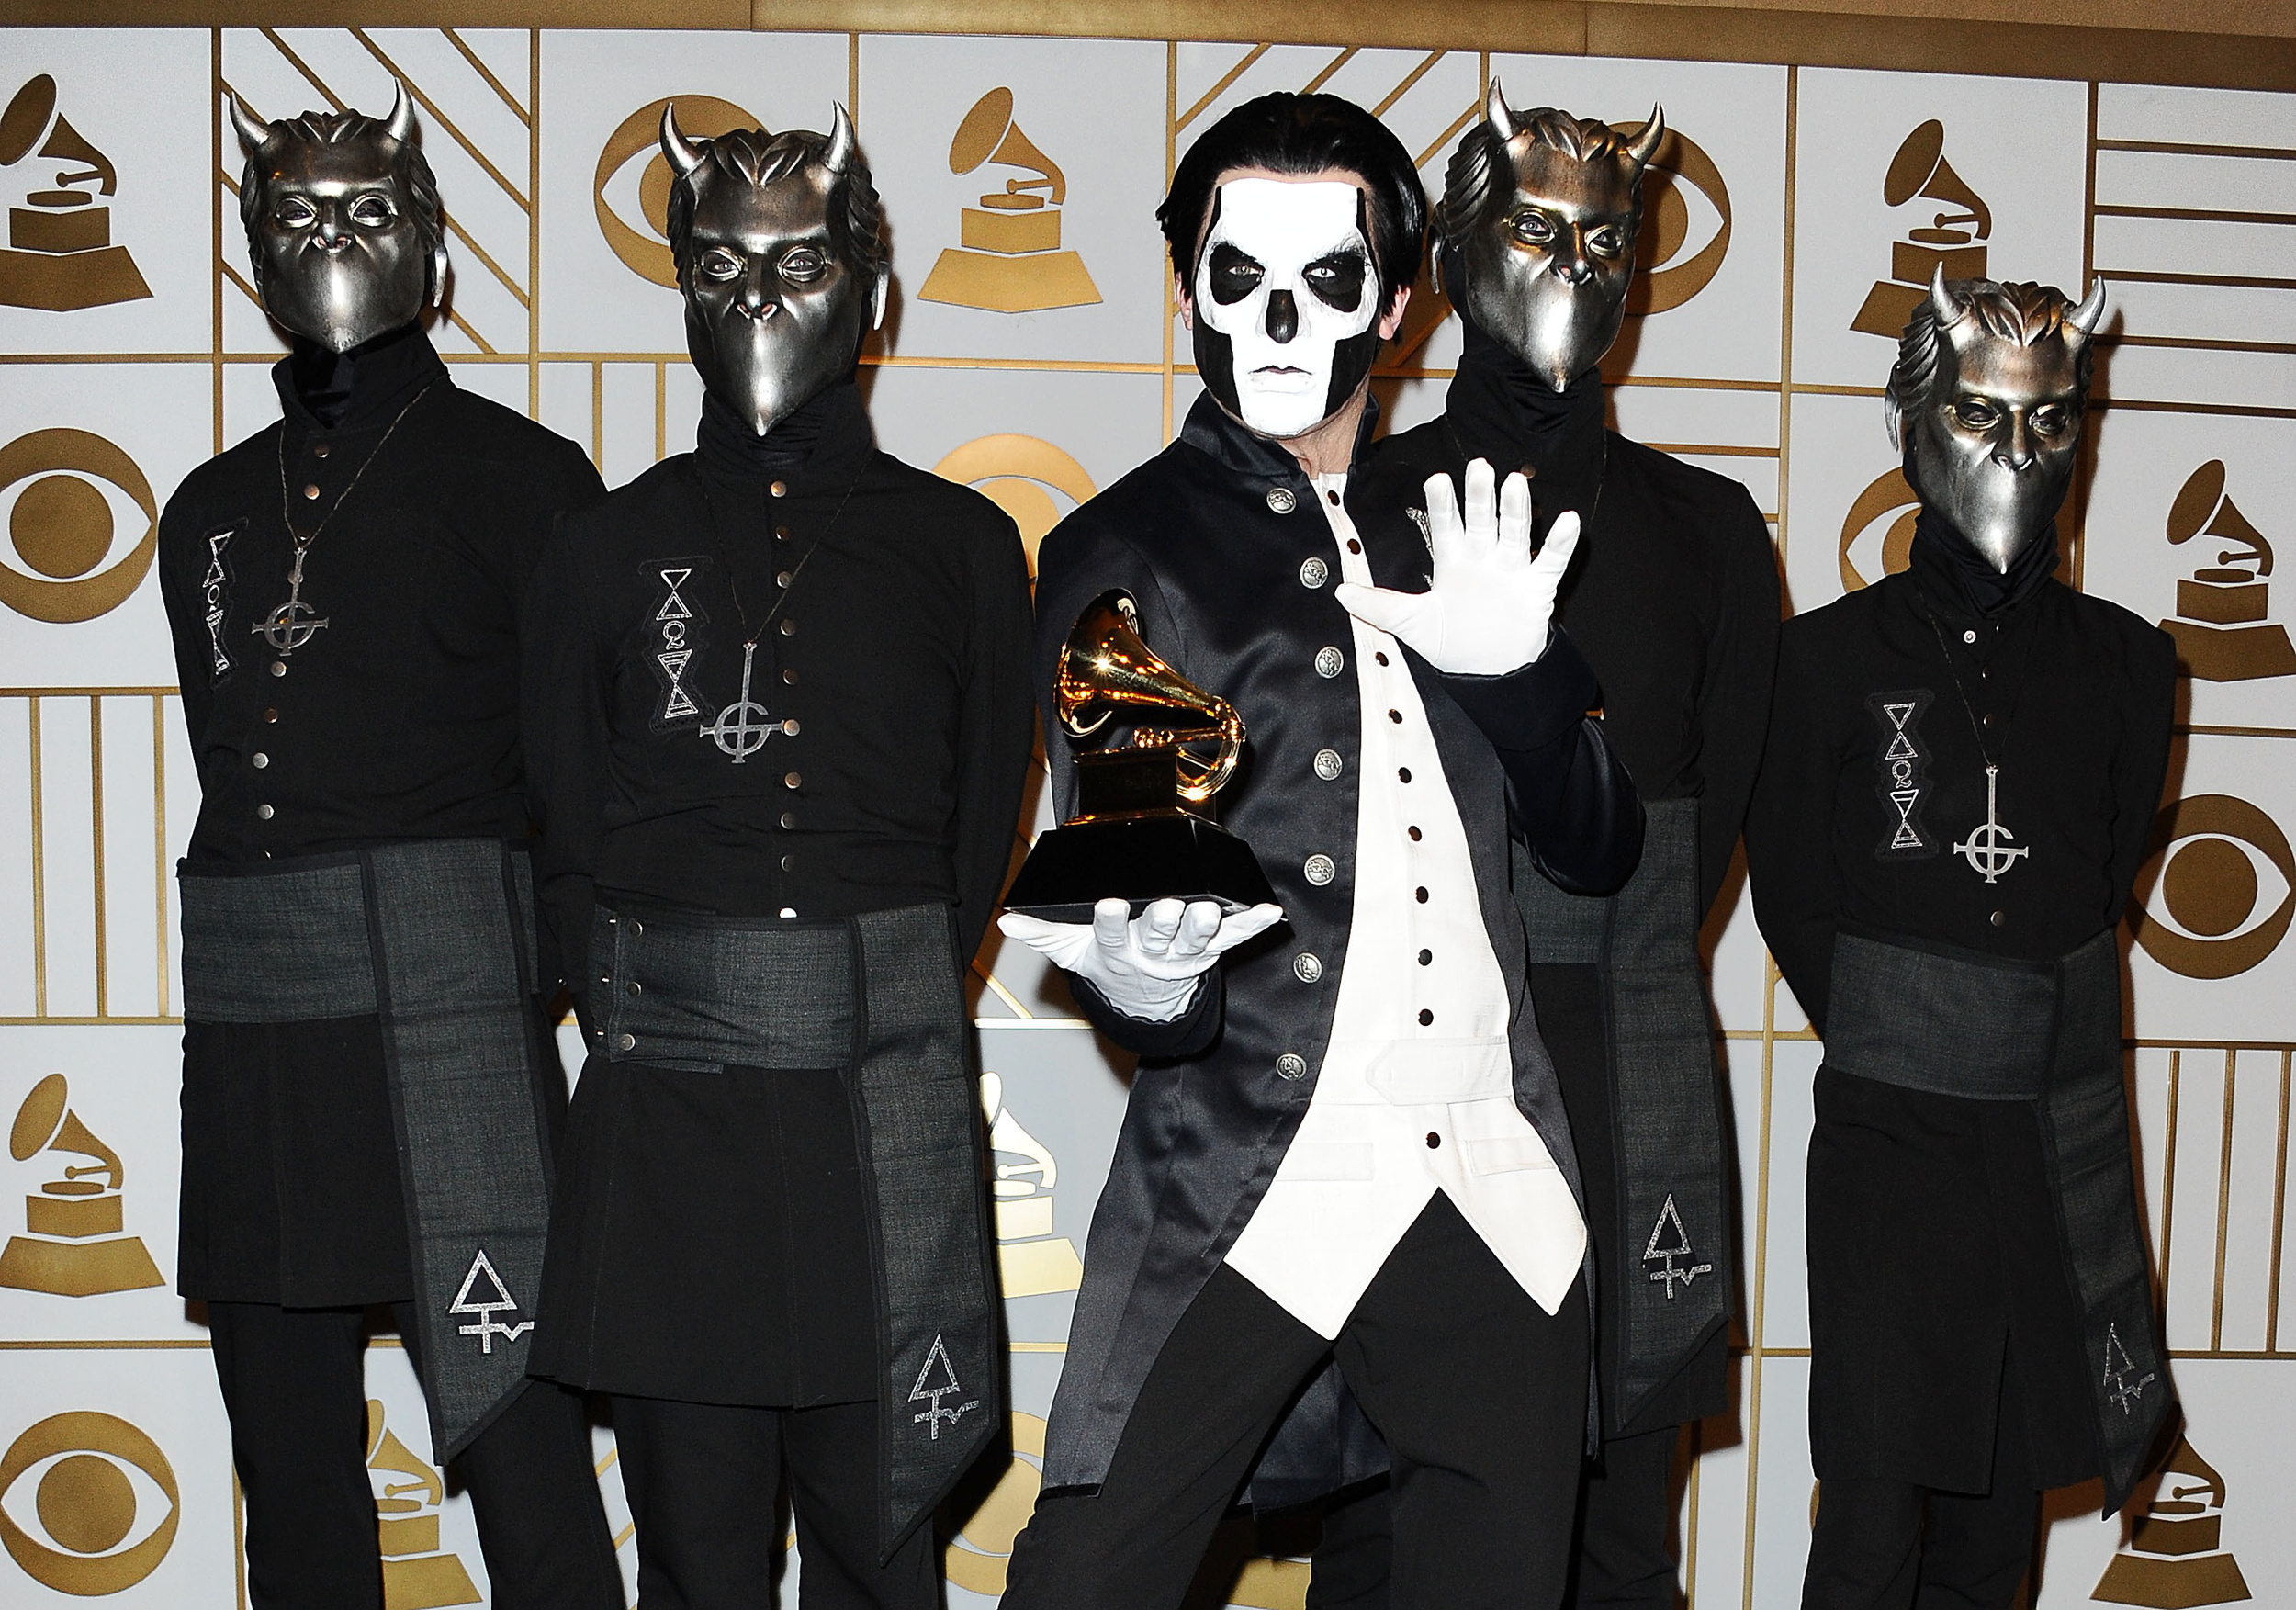 <p>For those metal fans not in the know, it's time well spent experiencing the wonderment that's Ghost. These Swedish <a href="https://www.youtube.com/watch?v=-0Ao4t_fe0I">hard rock/metal masters, and Grammy winners</a>, have consistently generated acclaim, while also growing its popularity through its mysterious collective persona. The mystery includes nameless band members (though frontman Tobias Forge has played the roles of <a href="https://www.youtube.com/watch?v=WMyzU1g6cjg">Papa Emeritus</a> and Cardinal Copia) dressed in religious, yet gothic, Cardinal and papal costumes during their highly theatrical and virtuosic stage shows. Campy perhaps, but all part of the Ghost experience. </p><p>You may also like: <a href='https://www.yardbarker.com/entertainment/articles/25_must_watch_three_hour_movies_to_help_you_pass_the_time_031924/s1__31609226'>25 must-watch three-hour movies to help you pass the time</a></p>